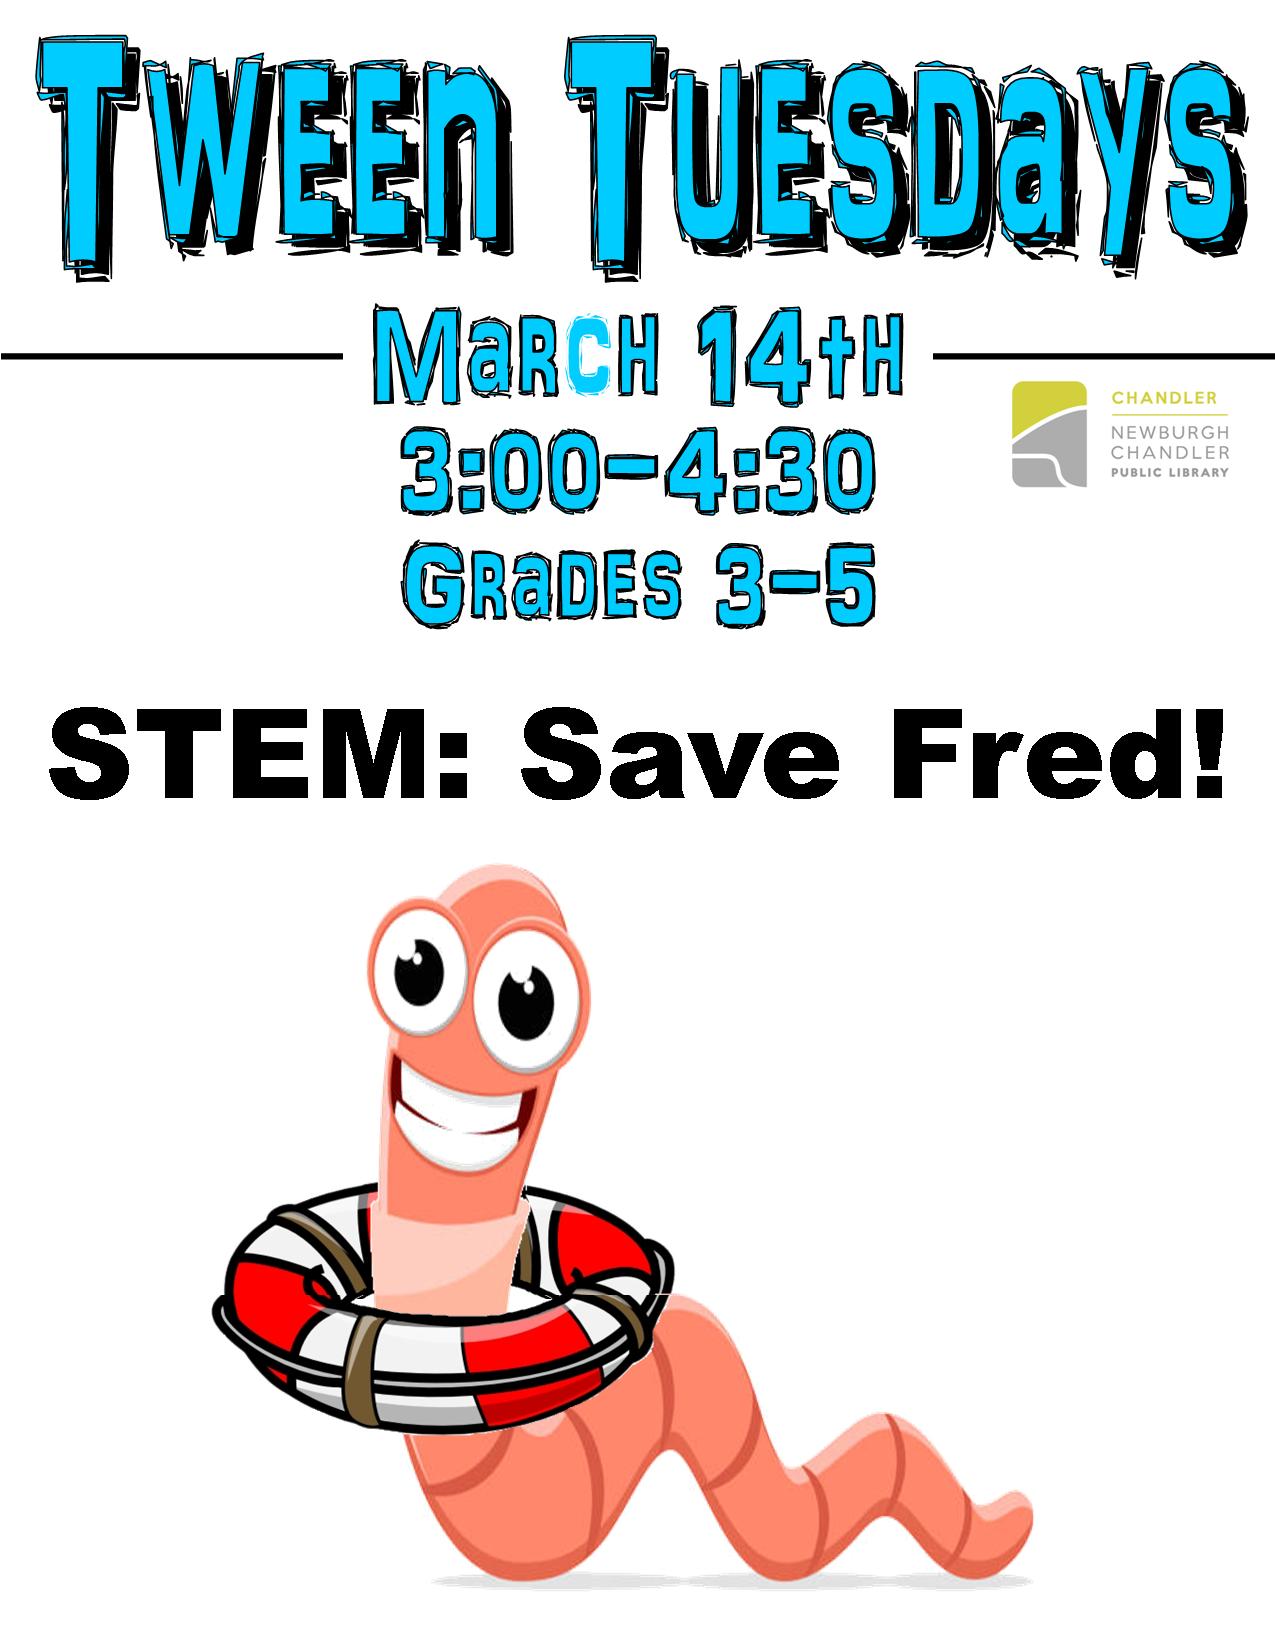 Tween Tuesdays: STEM Save Fred! @ Chandler Library Children's Department | Chandler | Indiana | United States